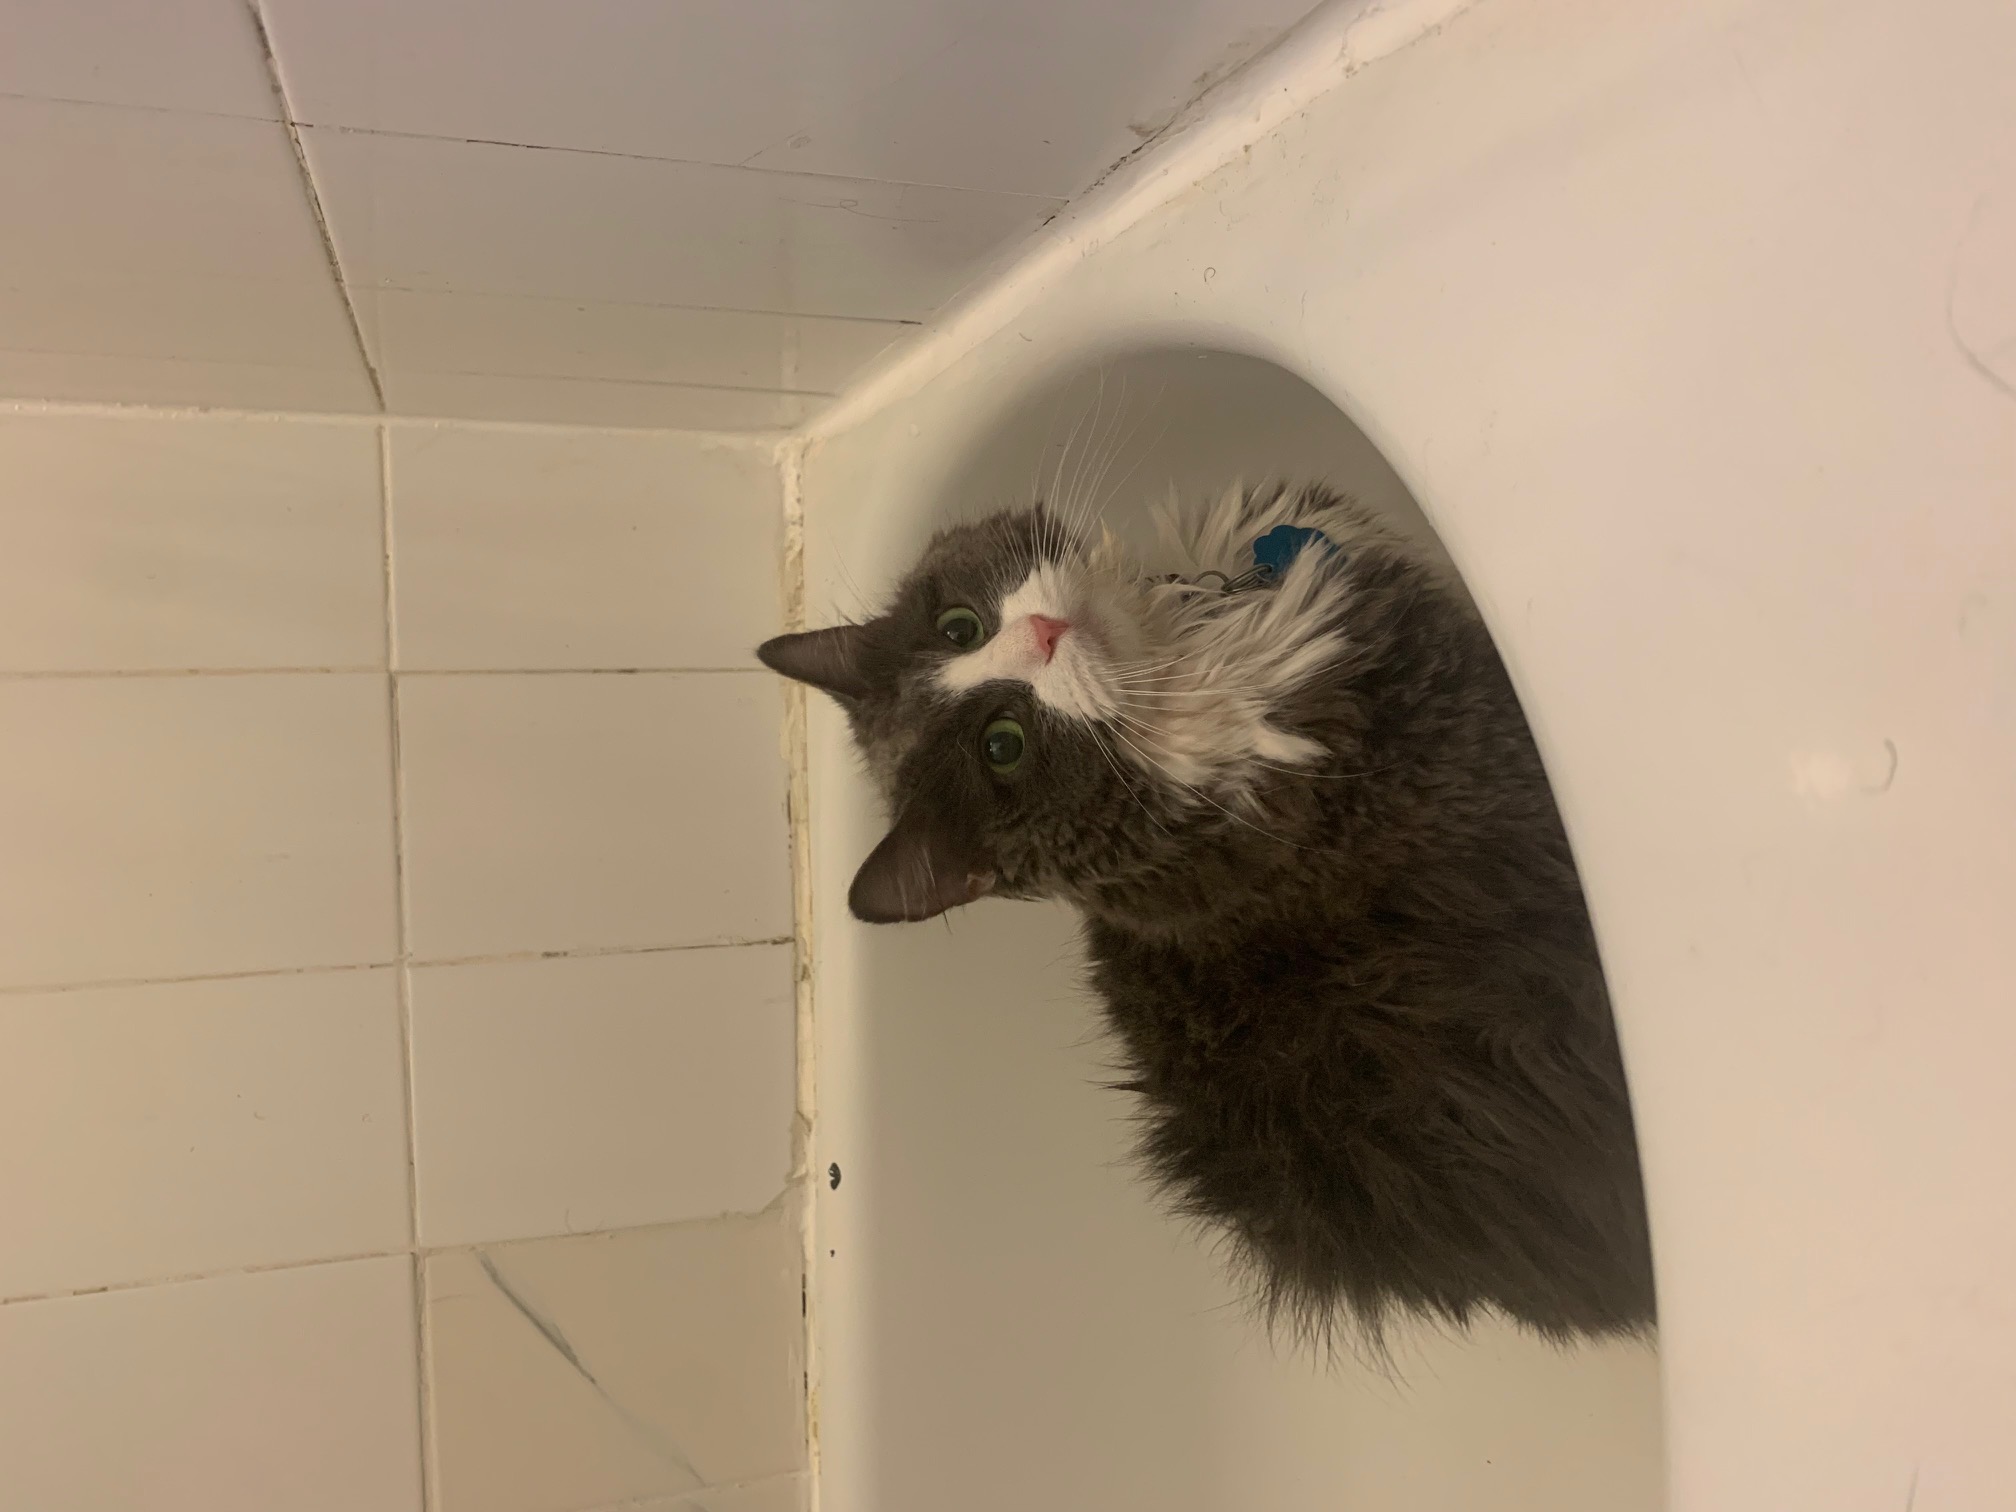 A long-haired gray-and-white cat with mint green eyes sitting in a bathtub.